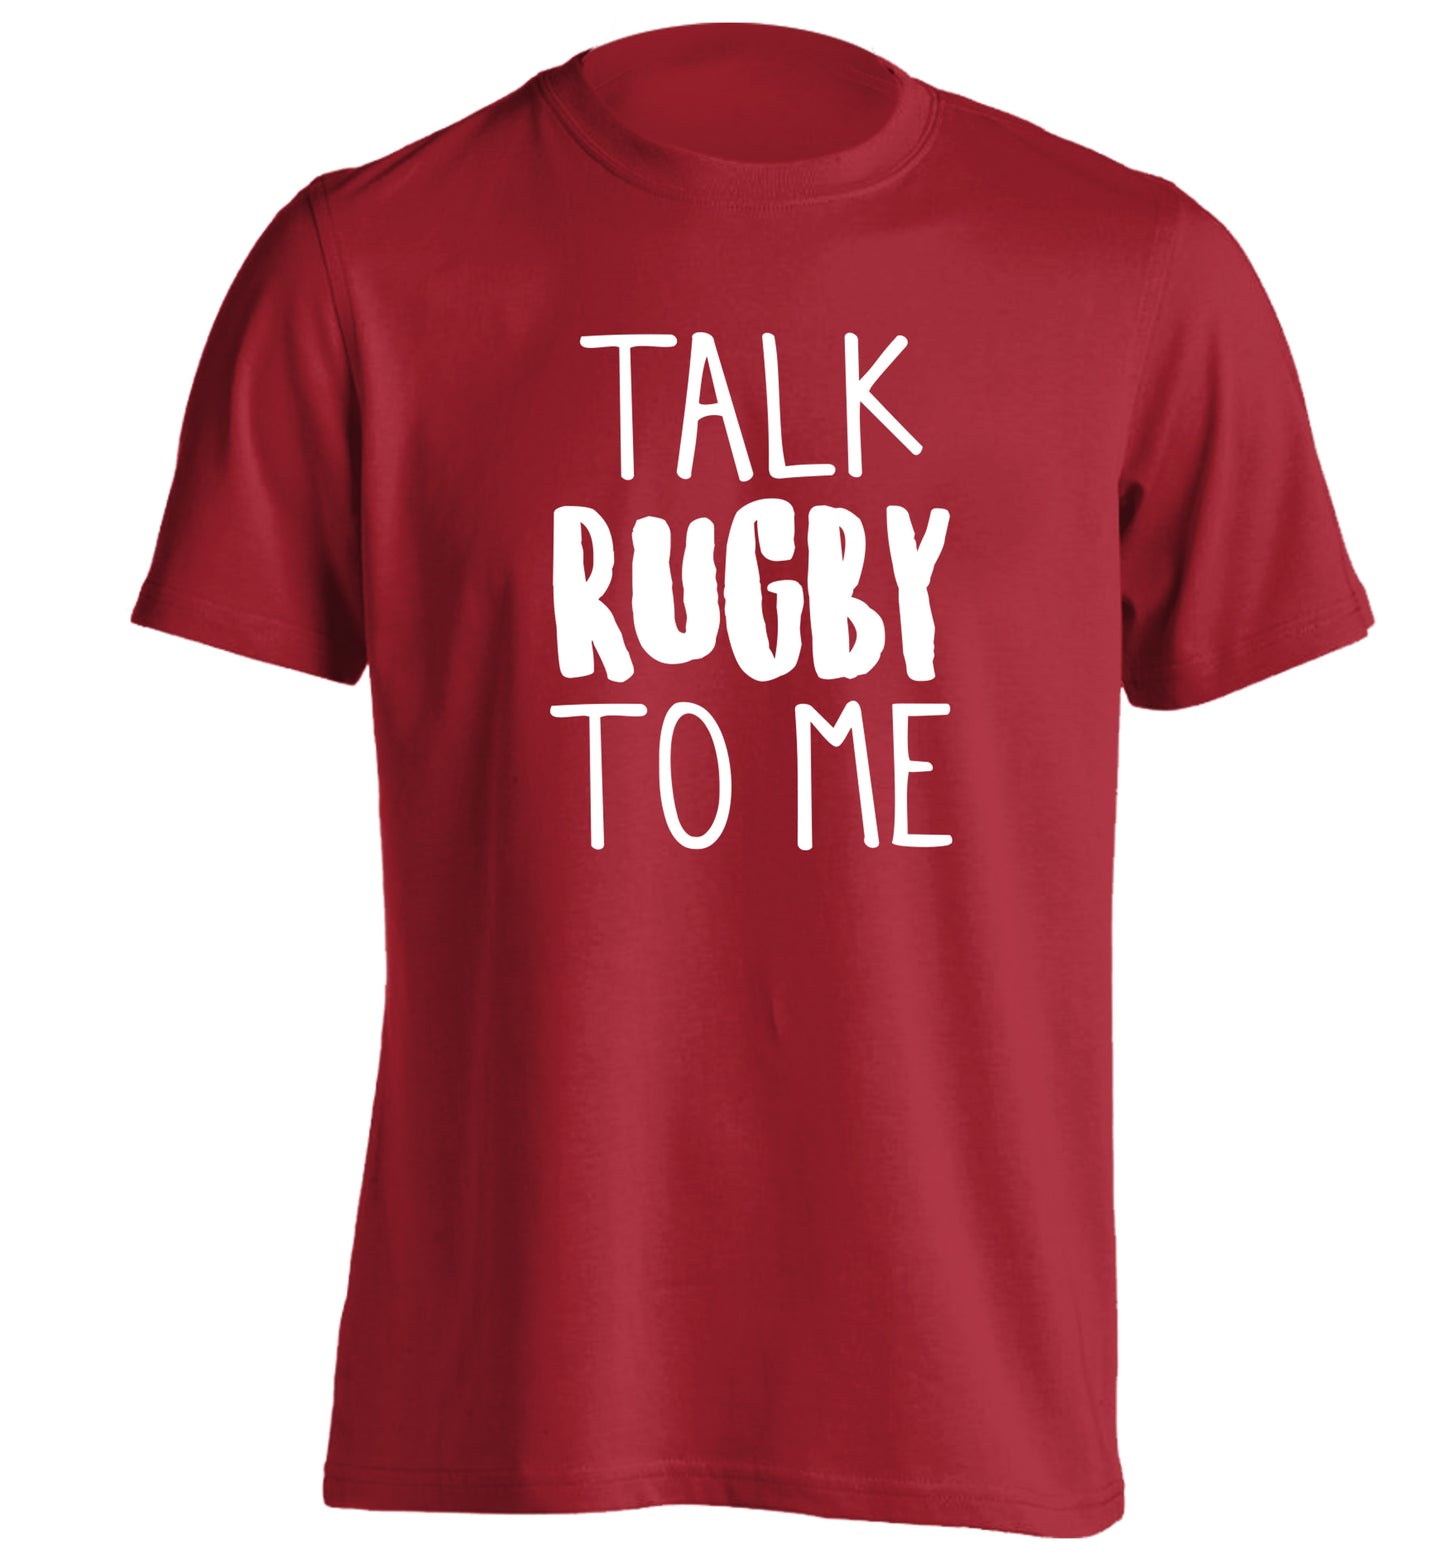 Talk rugby to me adults unisex red Tshirt 2XL